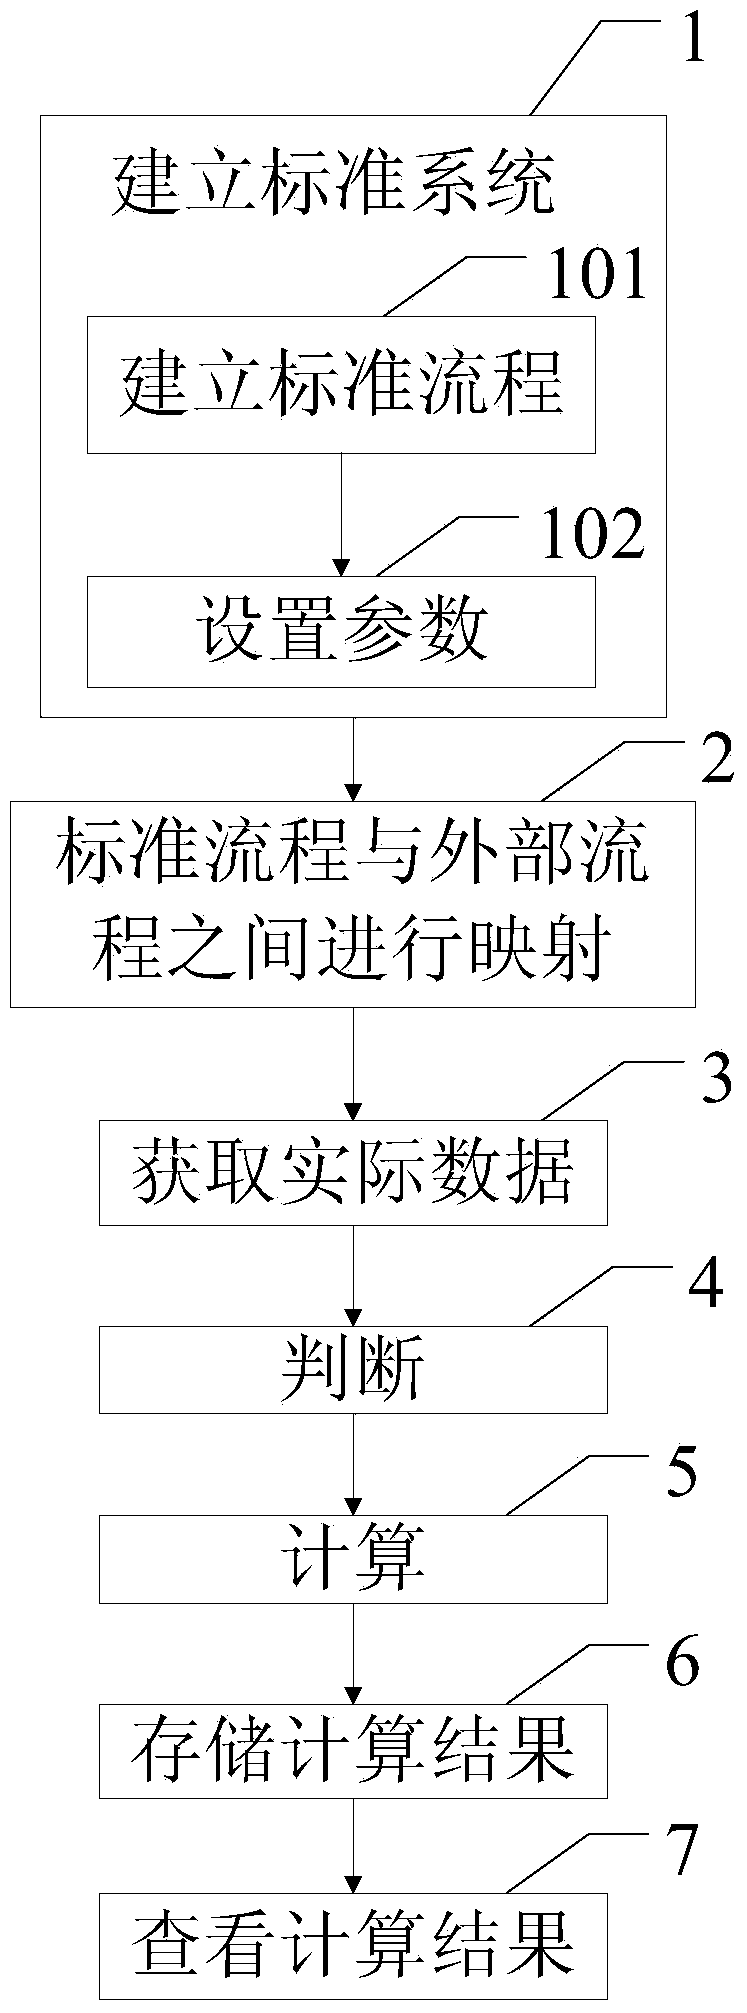 System management monitoring method and device